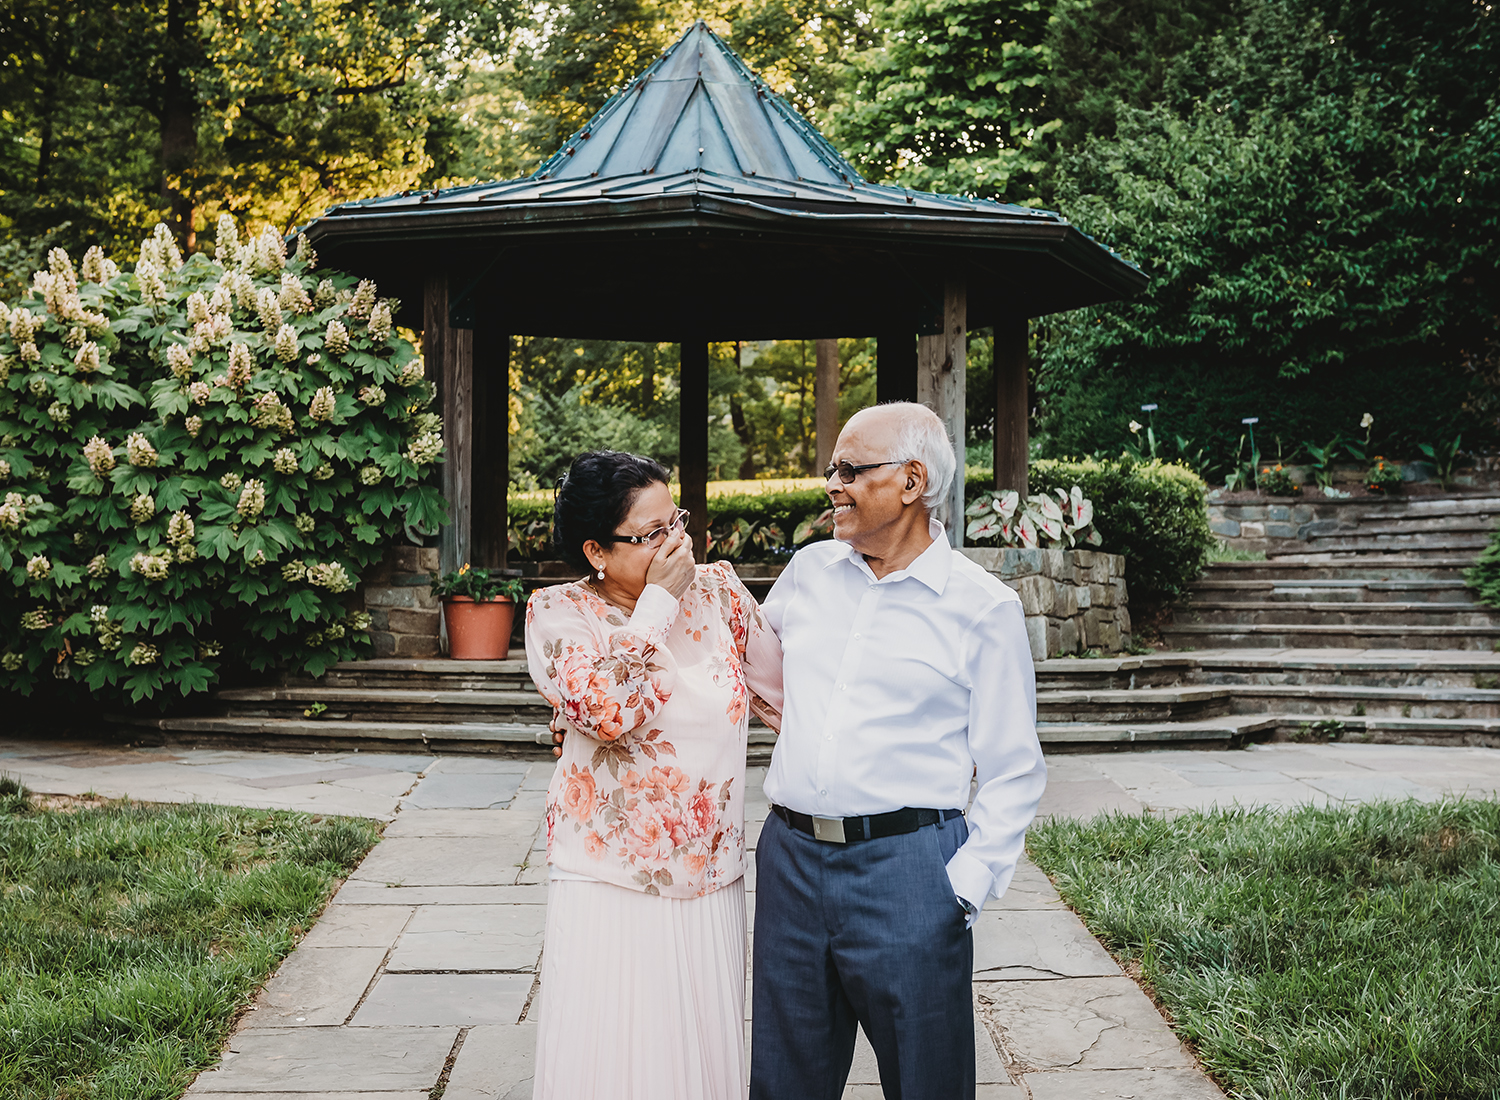 grandparent laughing at each other at gardens in maryland.jpg